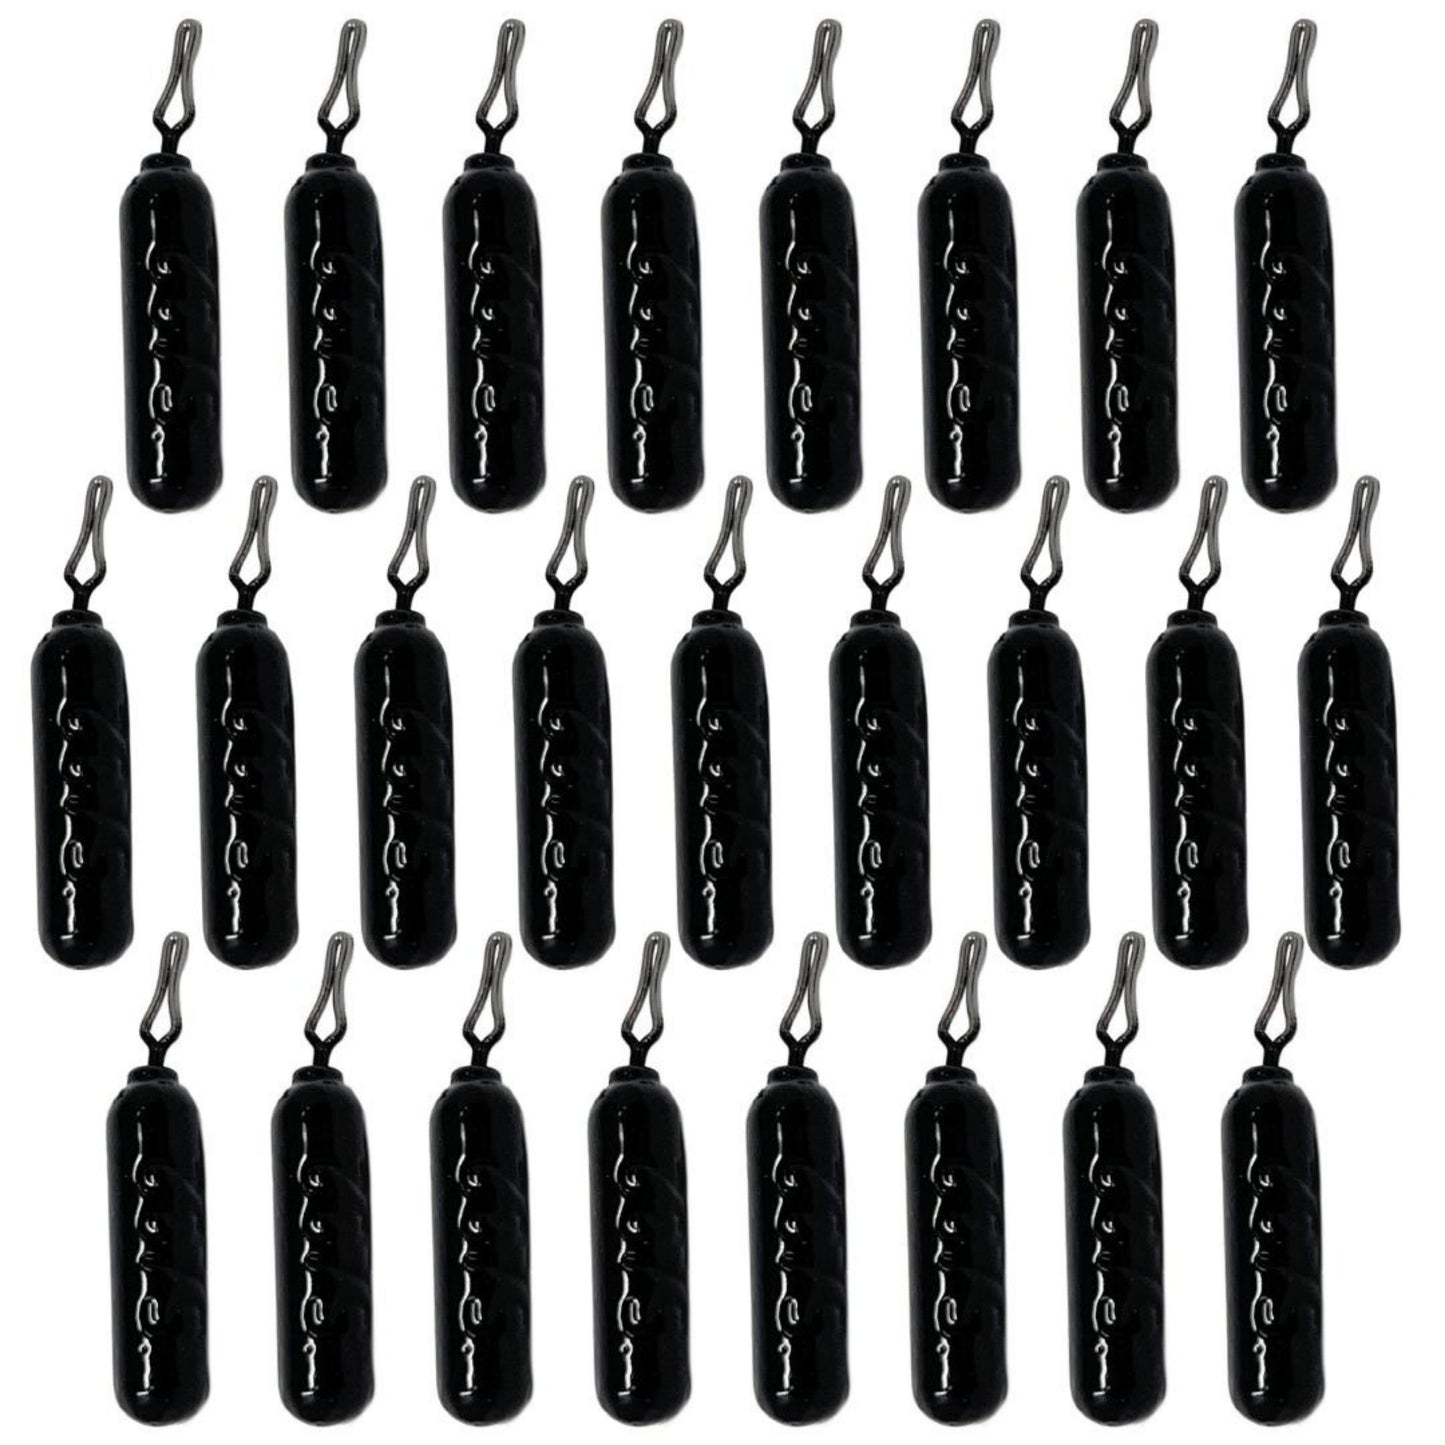 Reaction Tackle Lead Drop Shot Weights - Ideal for Bass Fishing- Bulk Packs or Kits